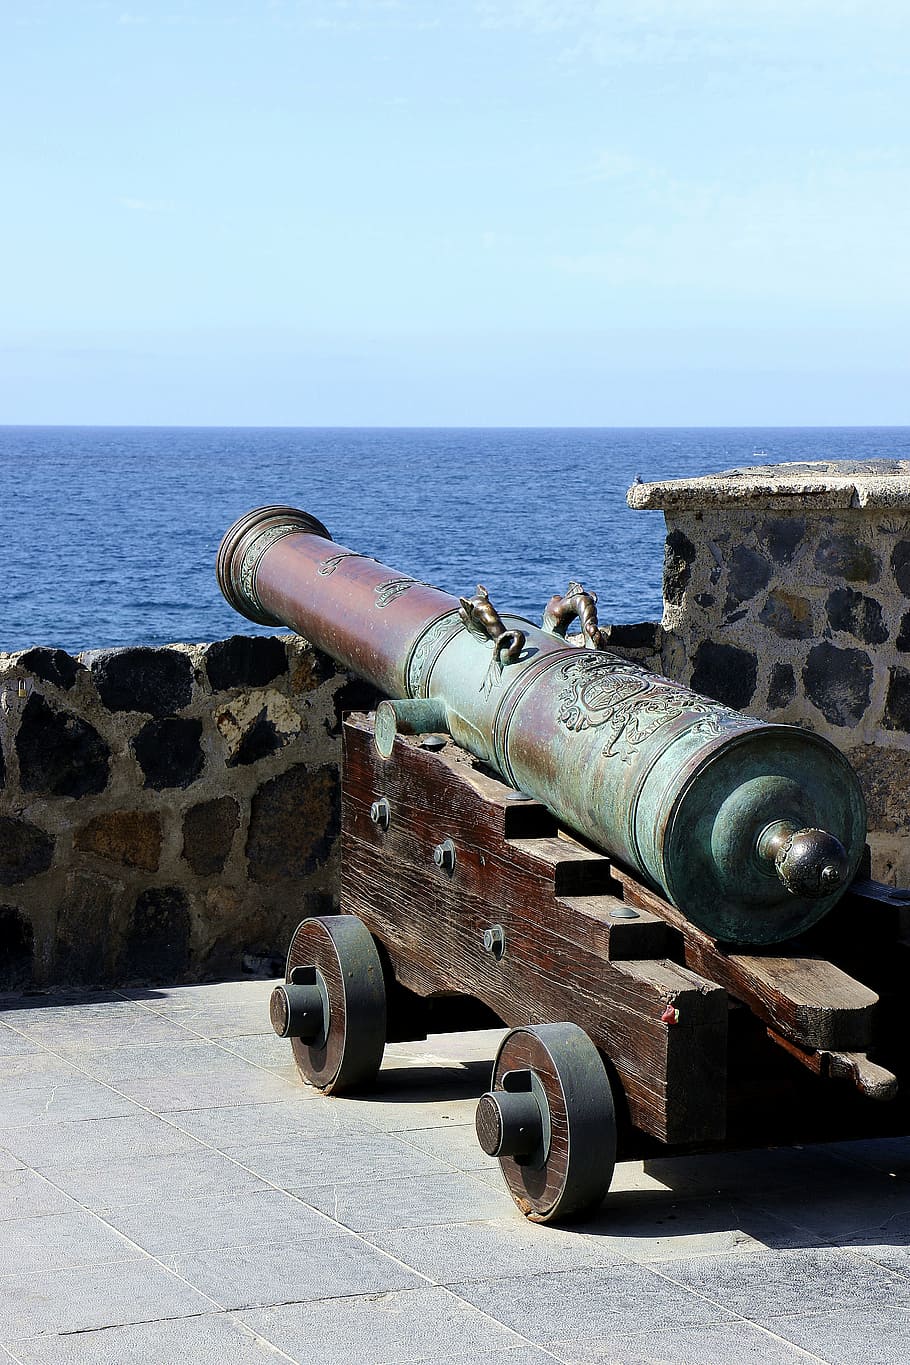 cannon, has happened, weapon, the barrel, monument, artillery, militaria, defense, history, old weapons